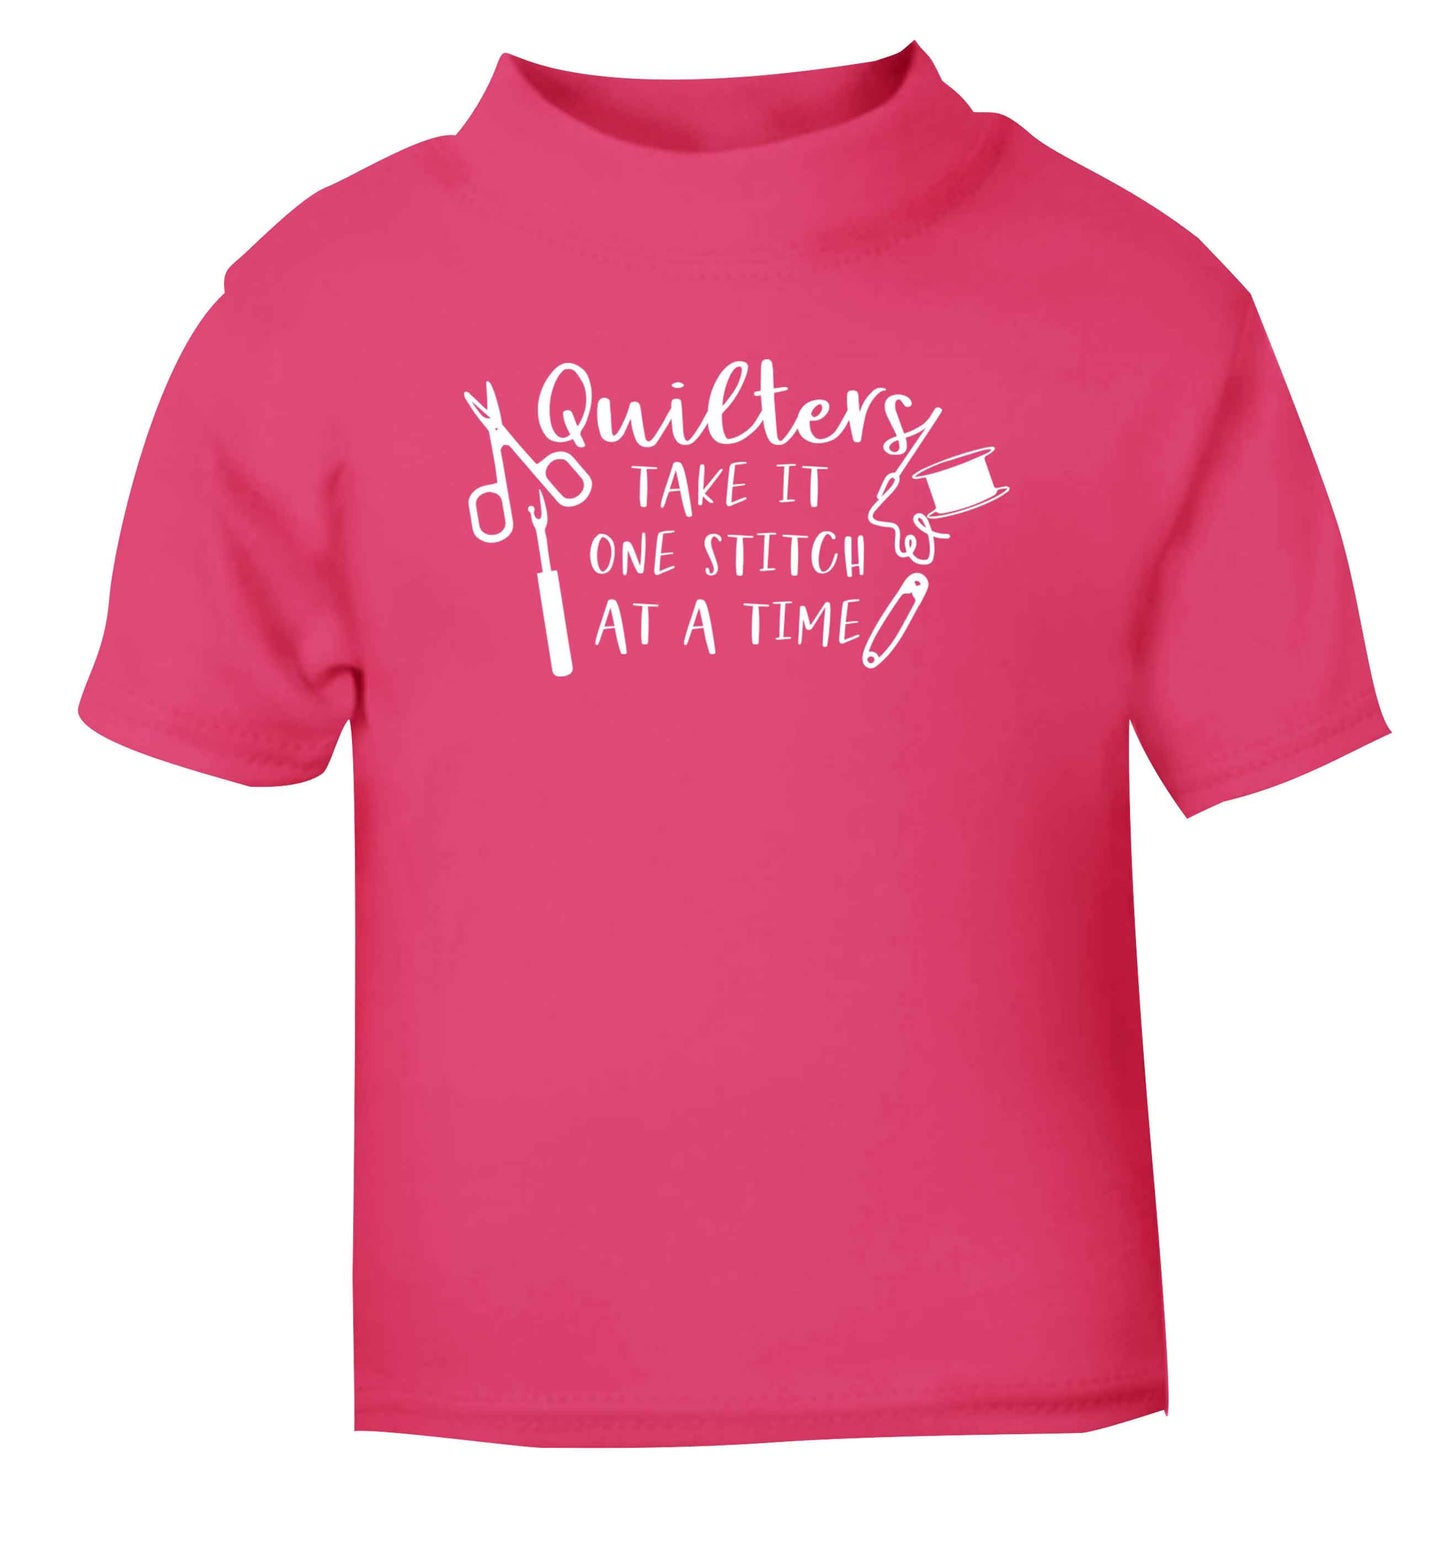 Quilters take it one stitch at a time  pink Baby Toddler Tshirt 2 Years